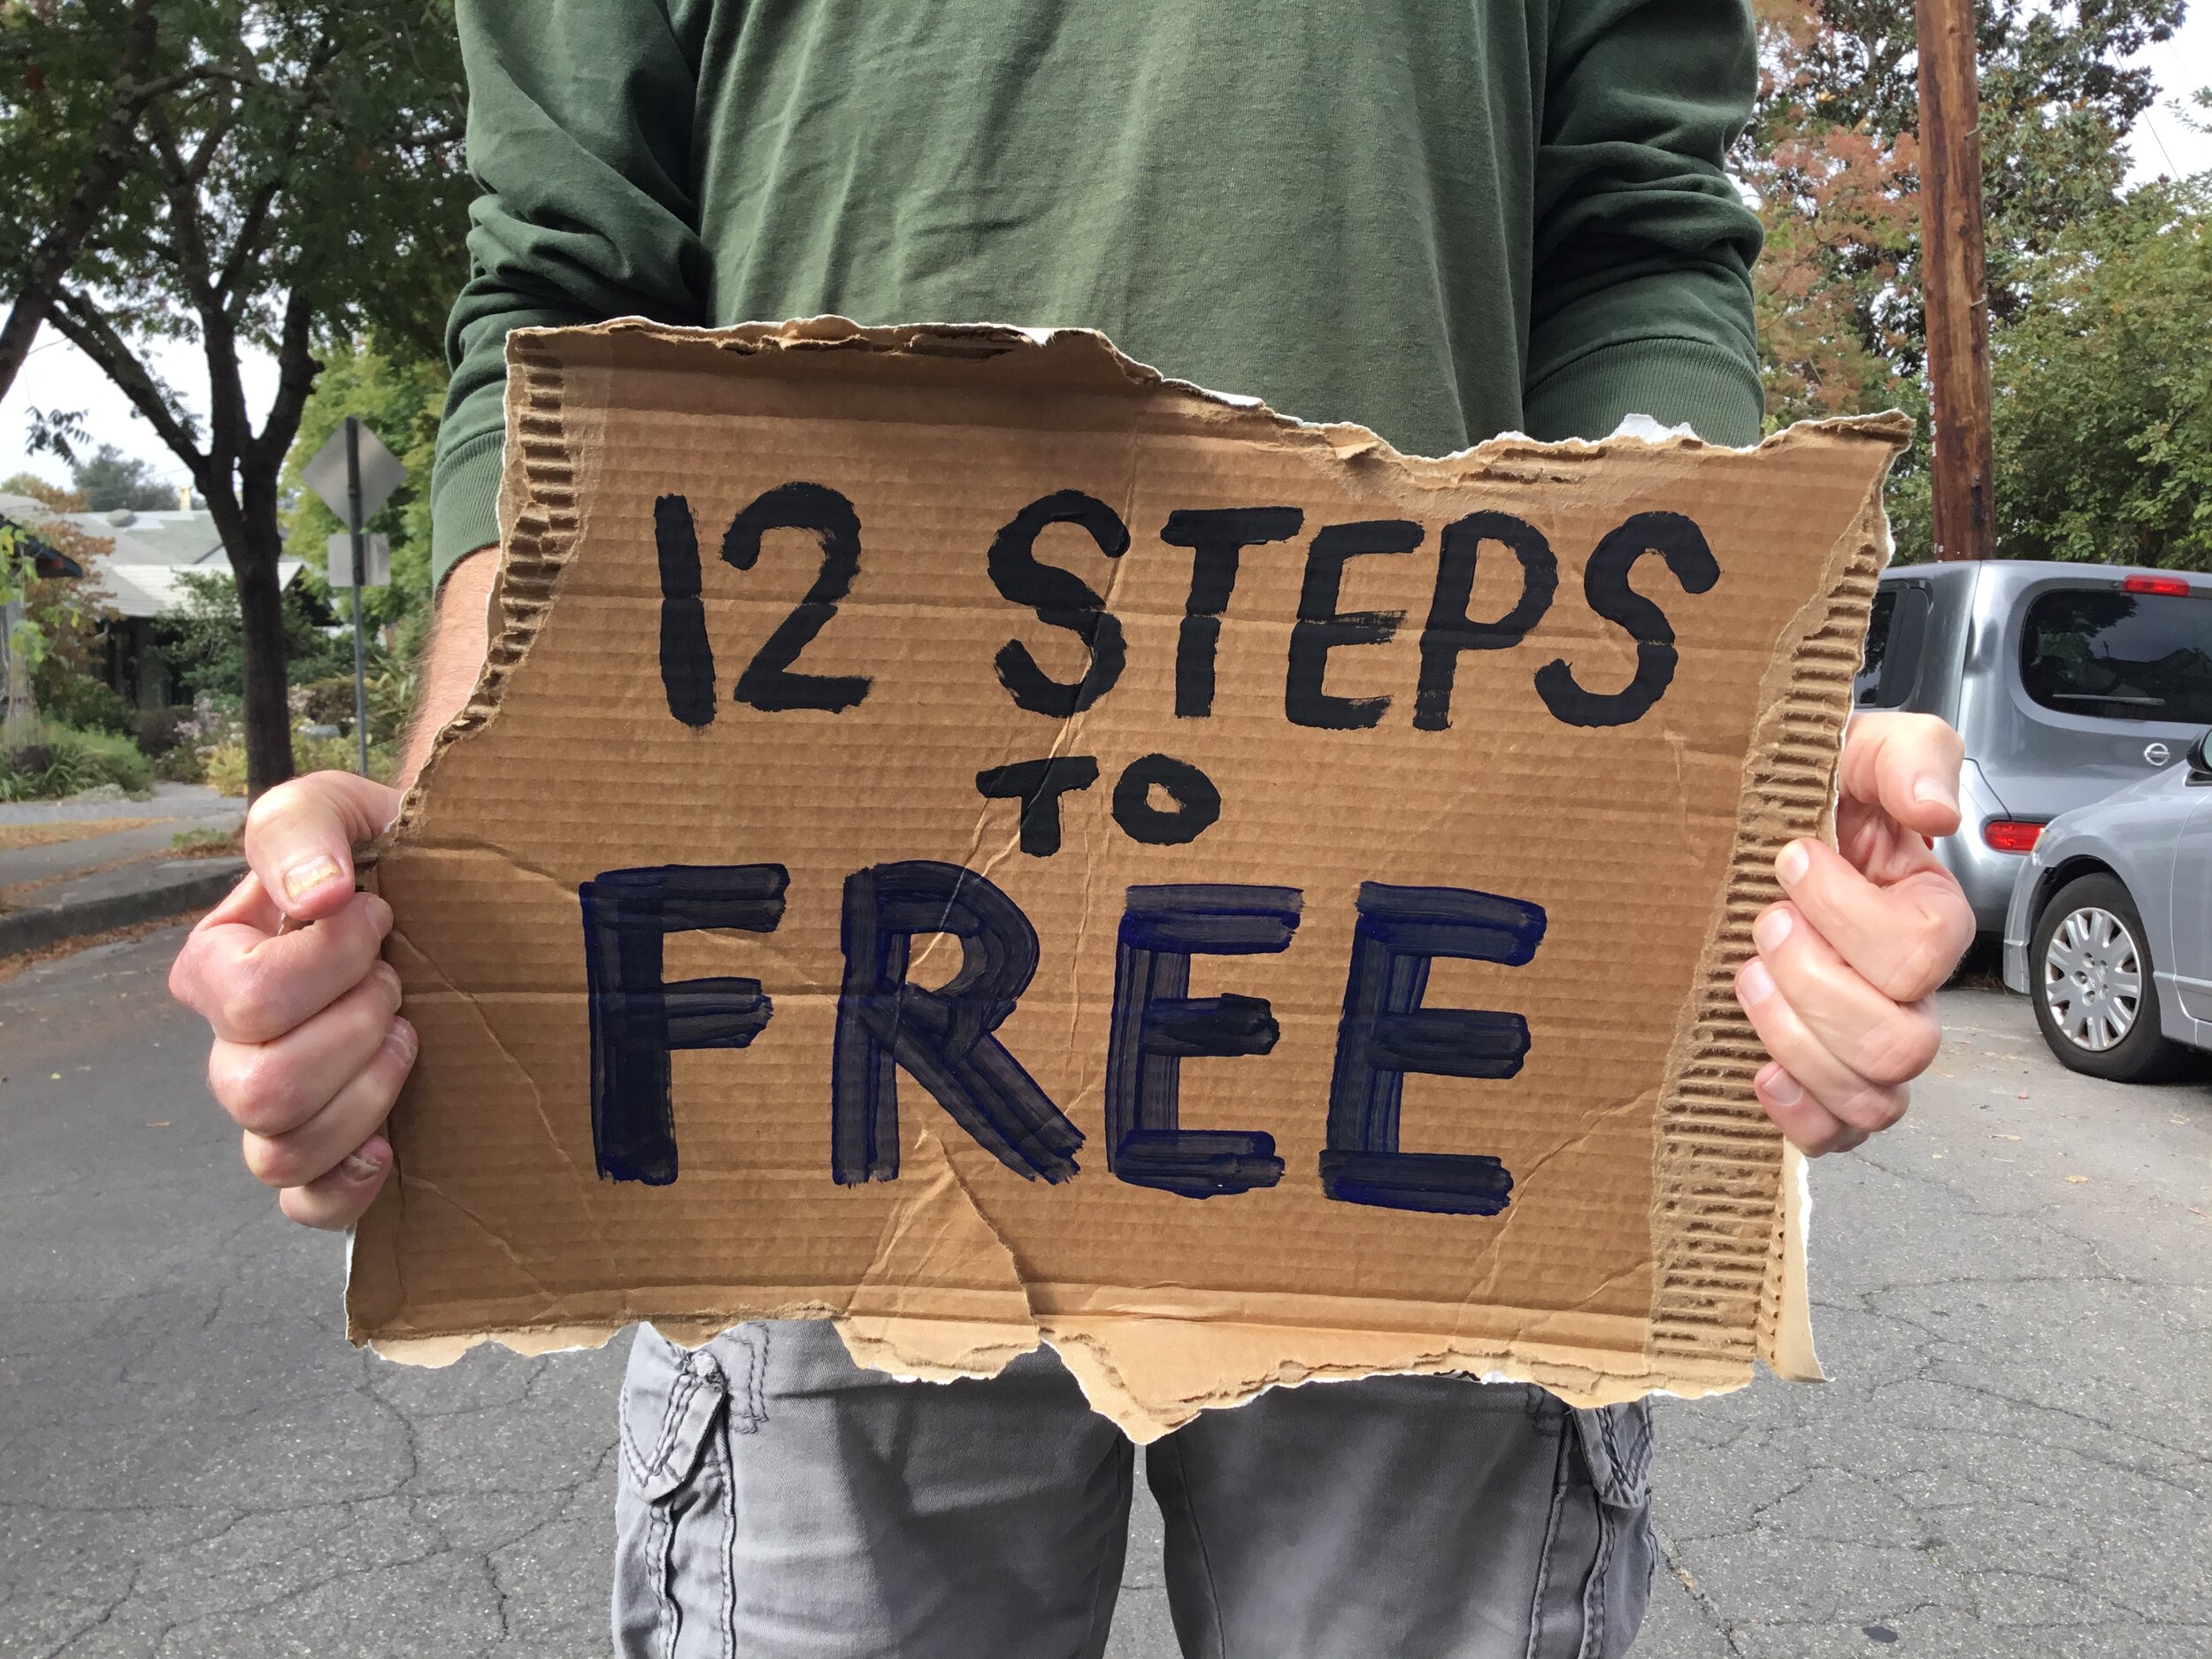 PHOTO PFS 12 steps to free - sign with hands.JPG